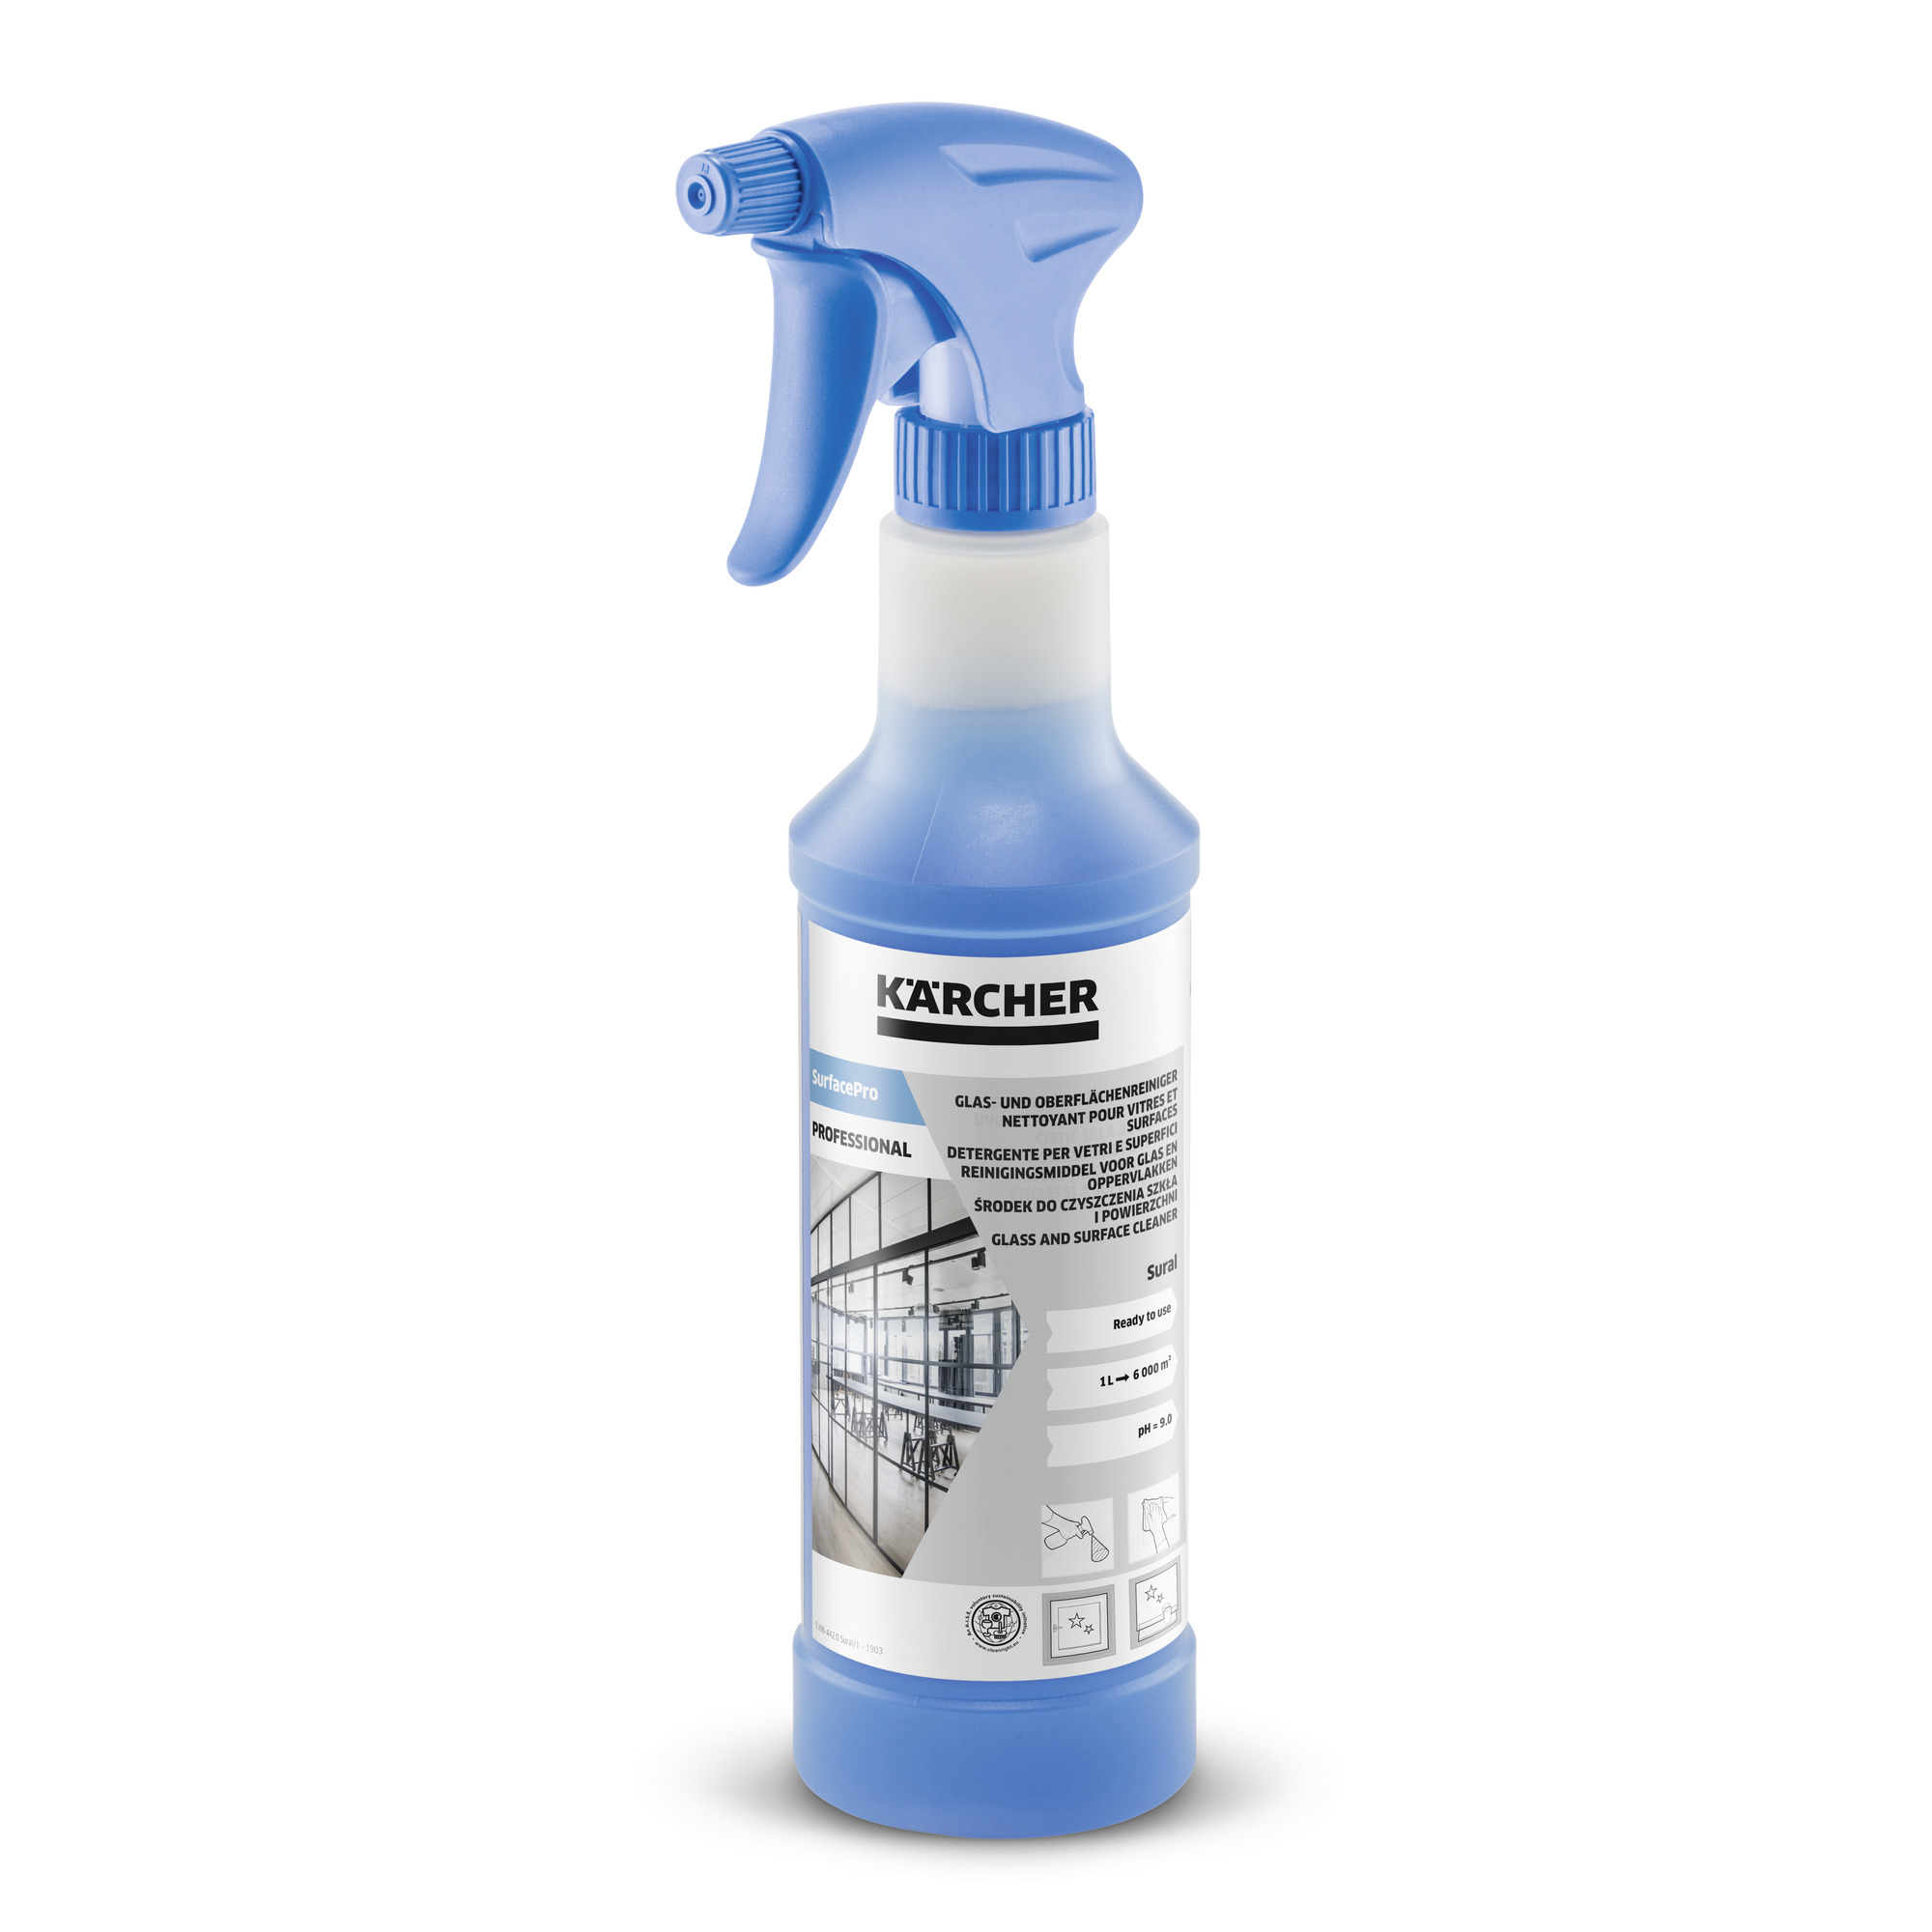 Kaercher SurfacePro Sural Glass and Surface Cleaner